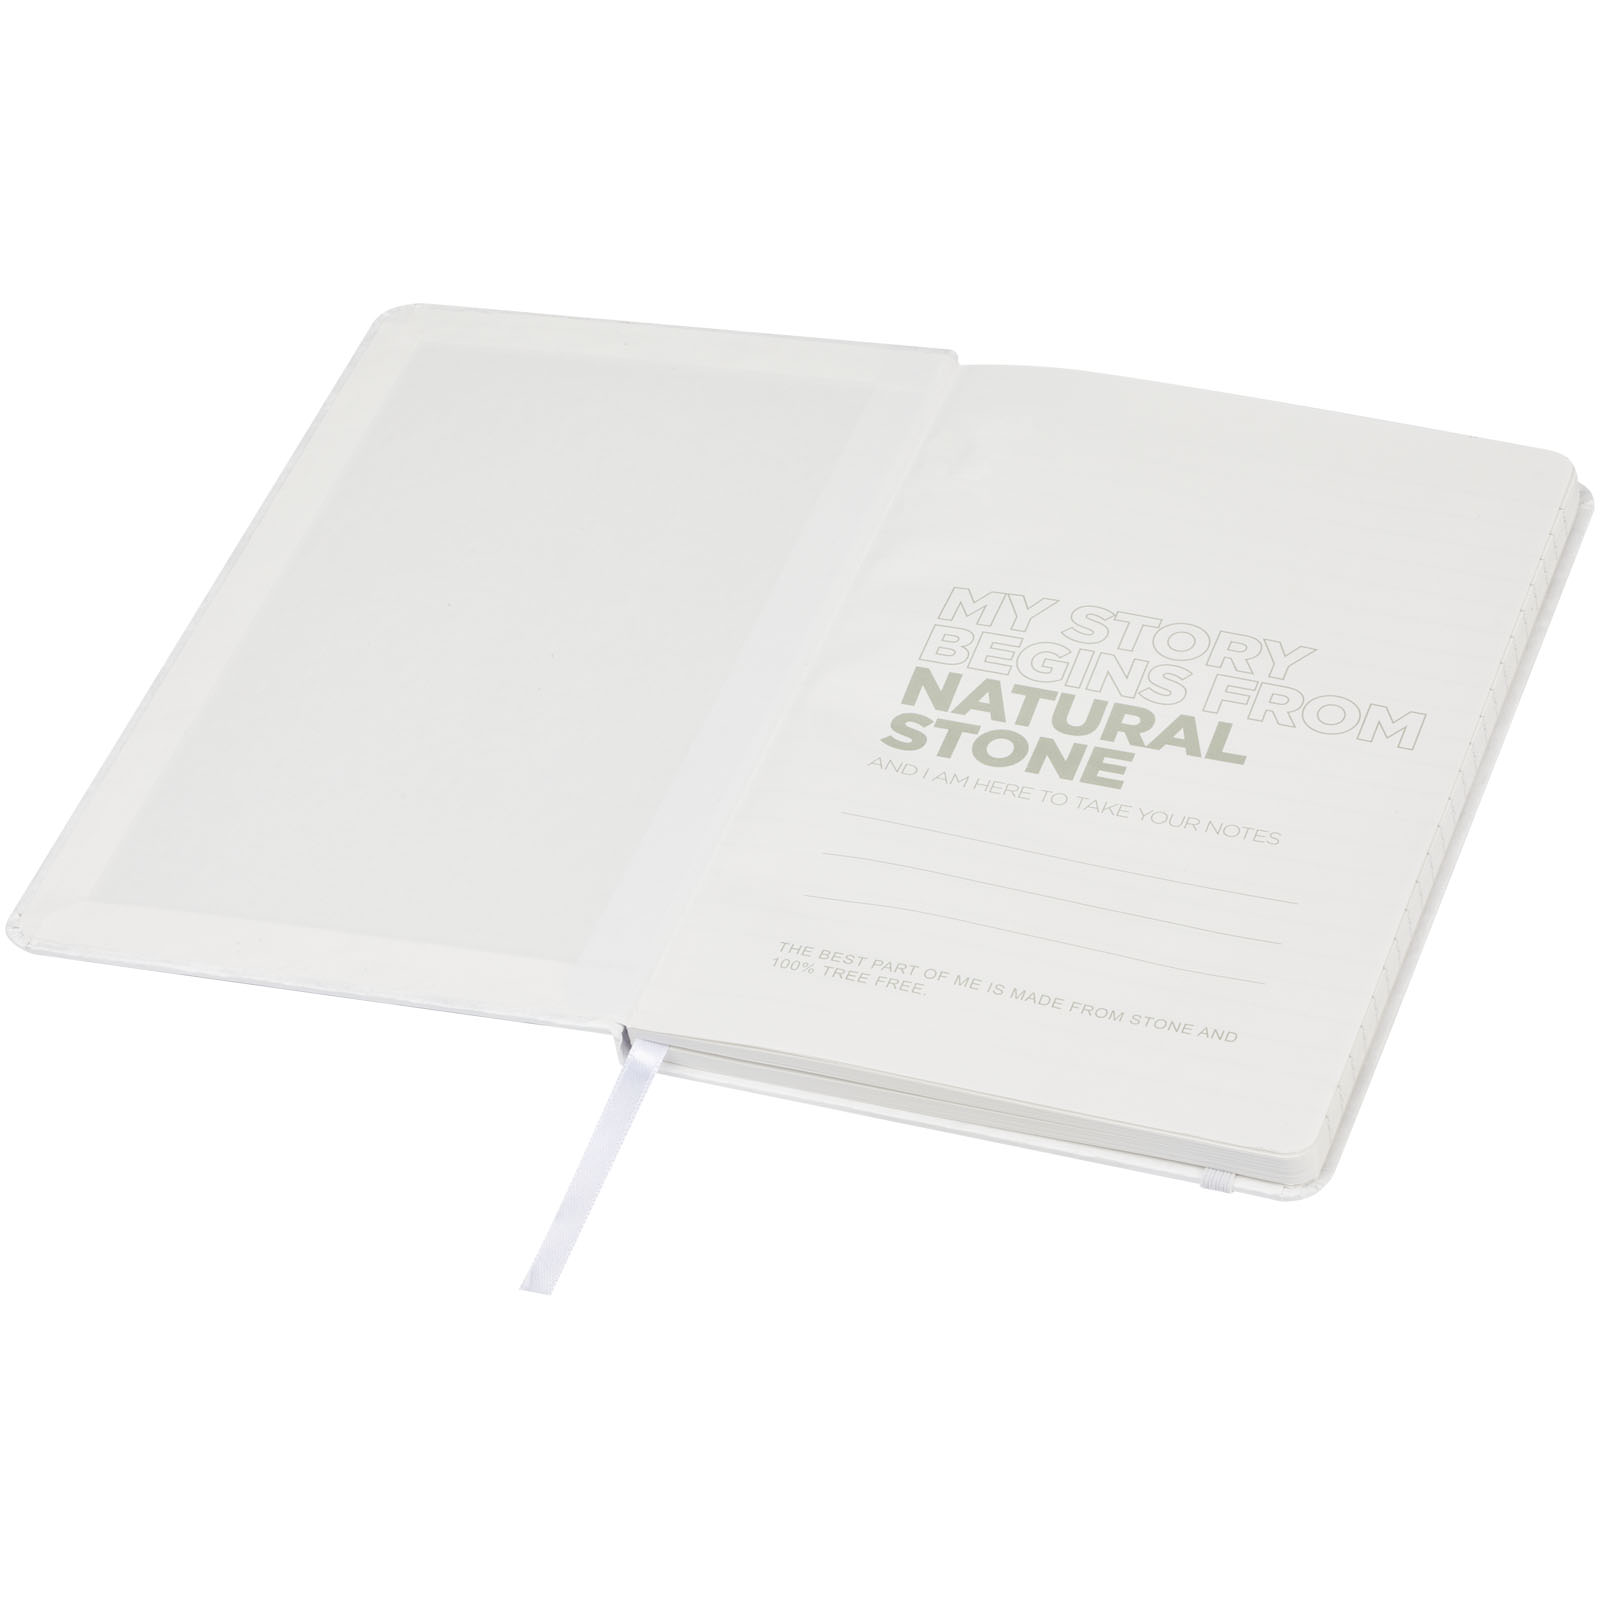 Advertising Hard cover notebooks - Breccia A5 stone paper notebook - 4